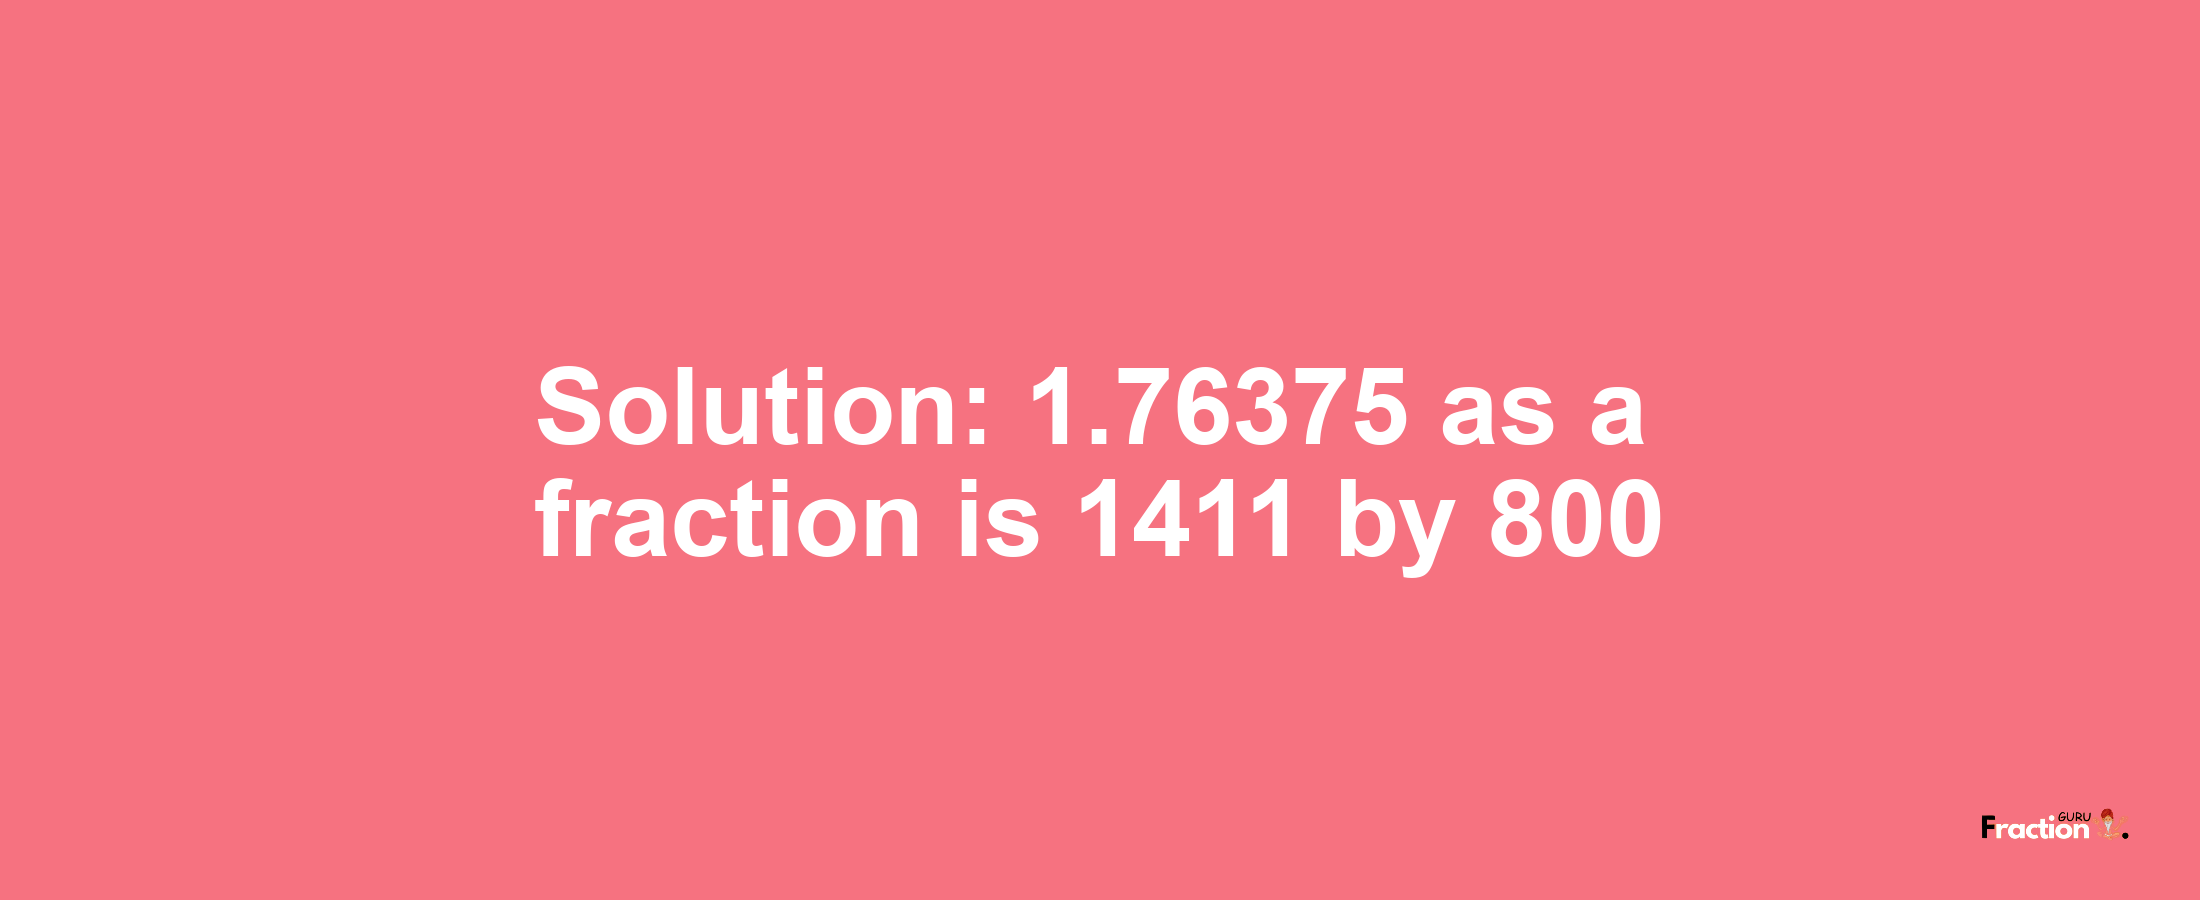 Solution:1.76375 as a fraction is 1411/800